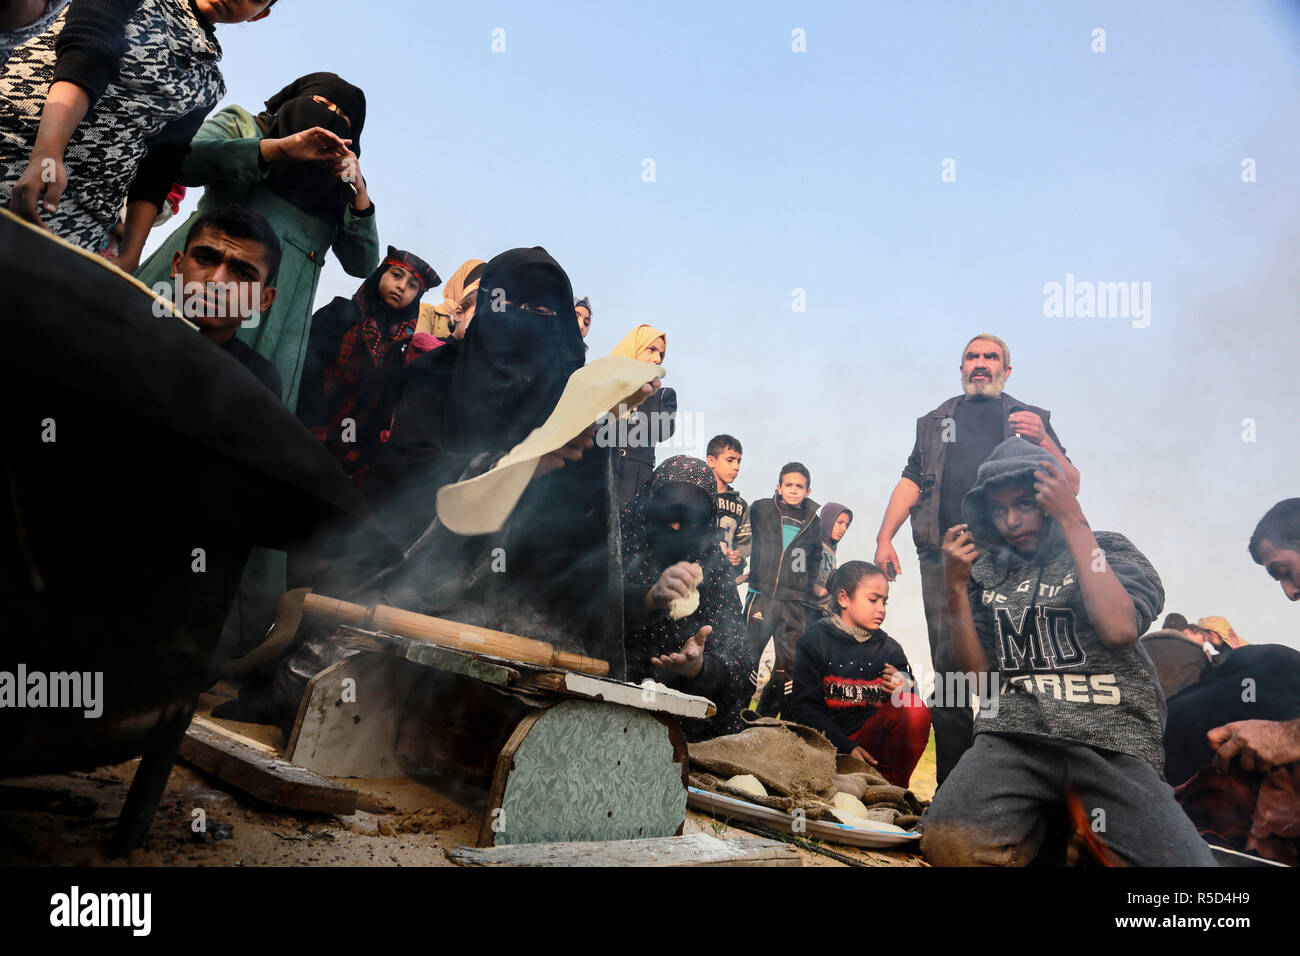 Gaza, Palestinian Territories - 30th November, 2018. A Palestinians women bake bread on firewood traditional, in the 'Great Return Camp' near the border between Israel and Gaza, east of Rafah town in the southern Gaza Strip, on November 30, 2018. Credit: Abdel Rahim Khatib / Awakening / Alamy Live News Stock Photo